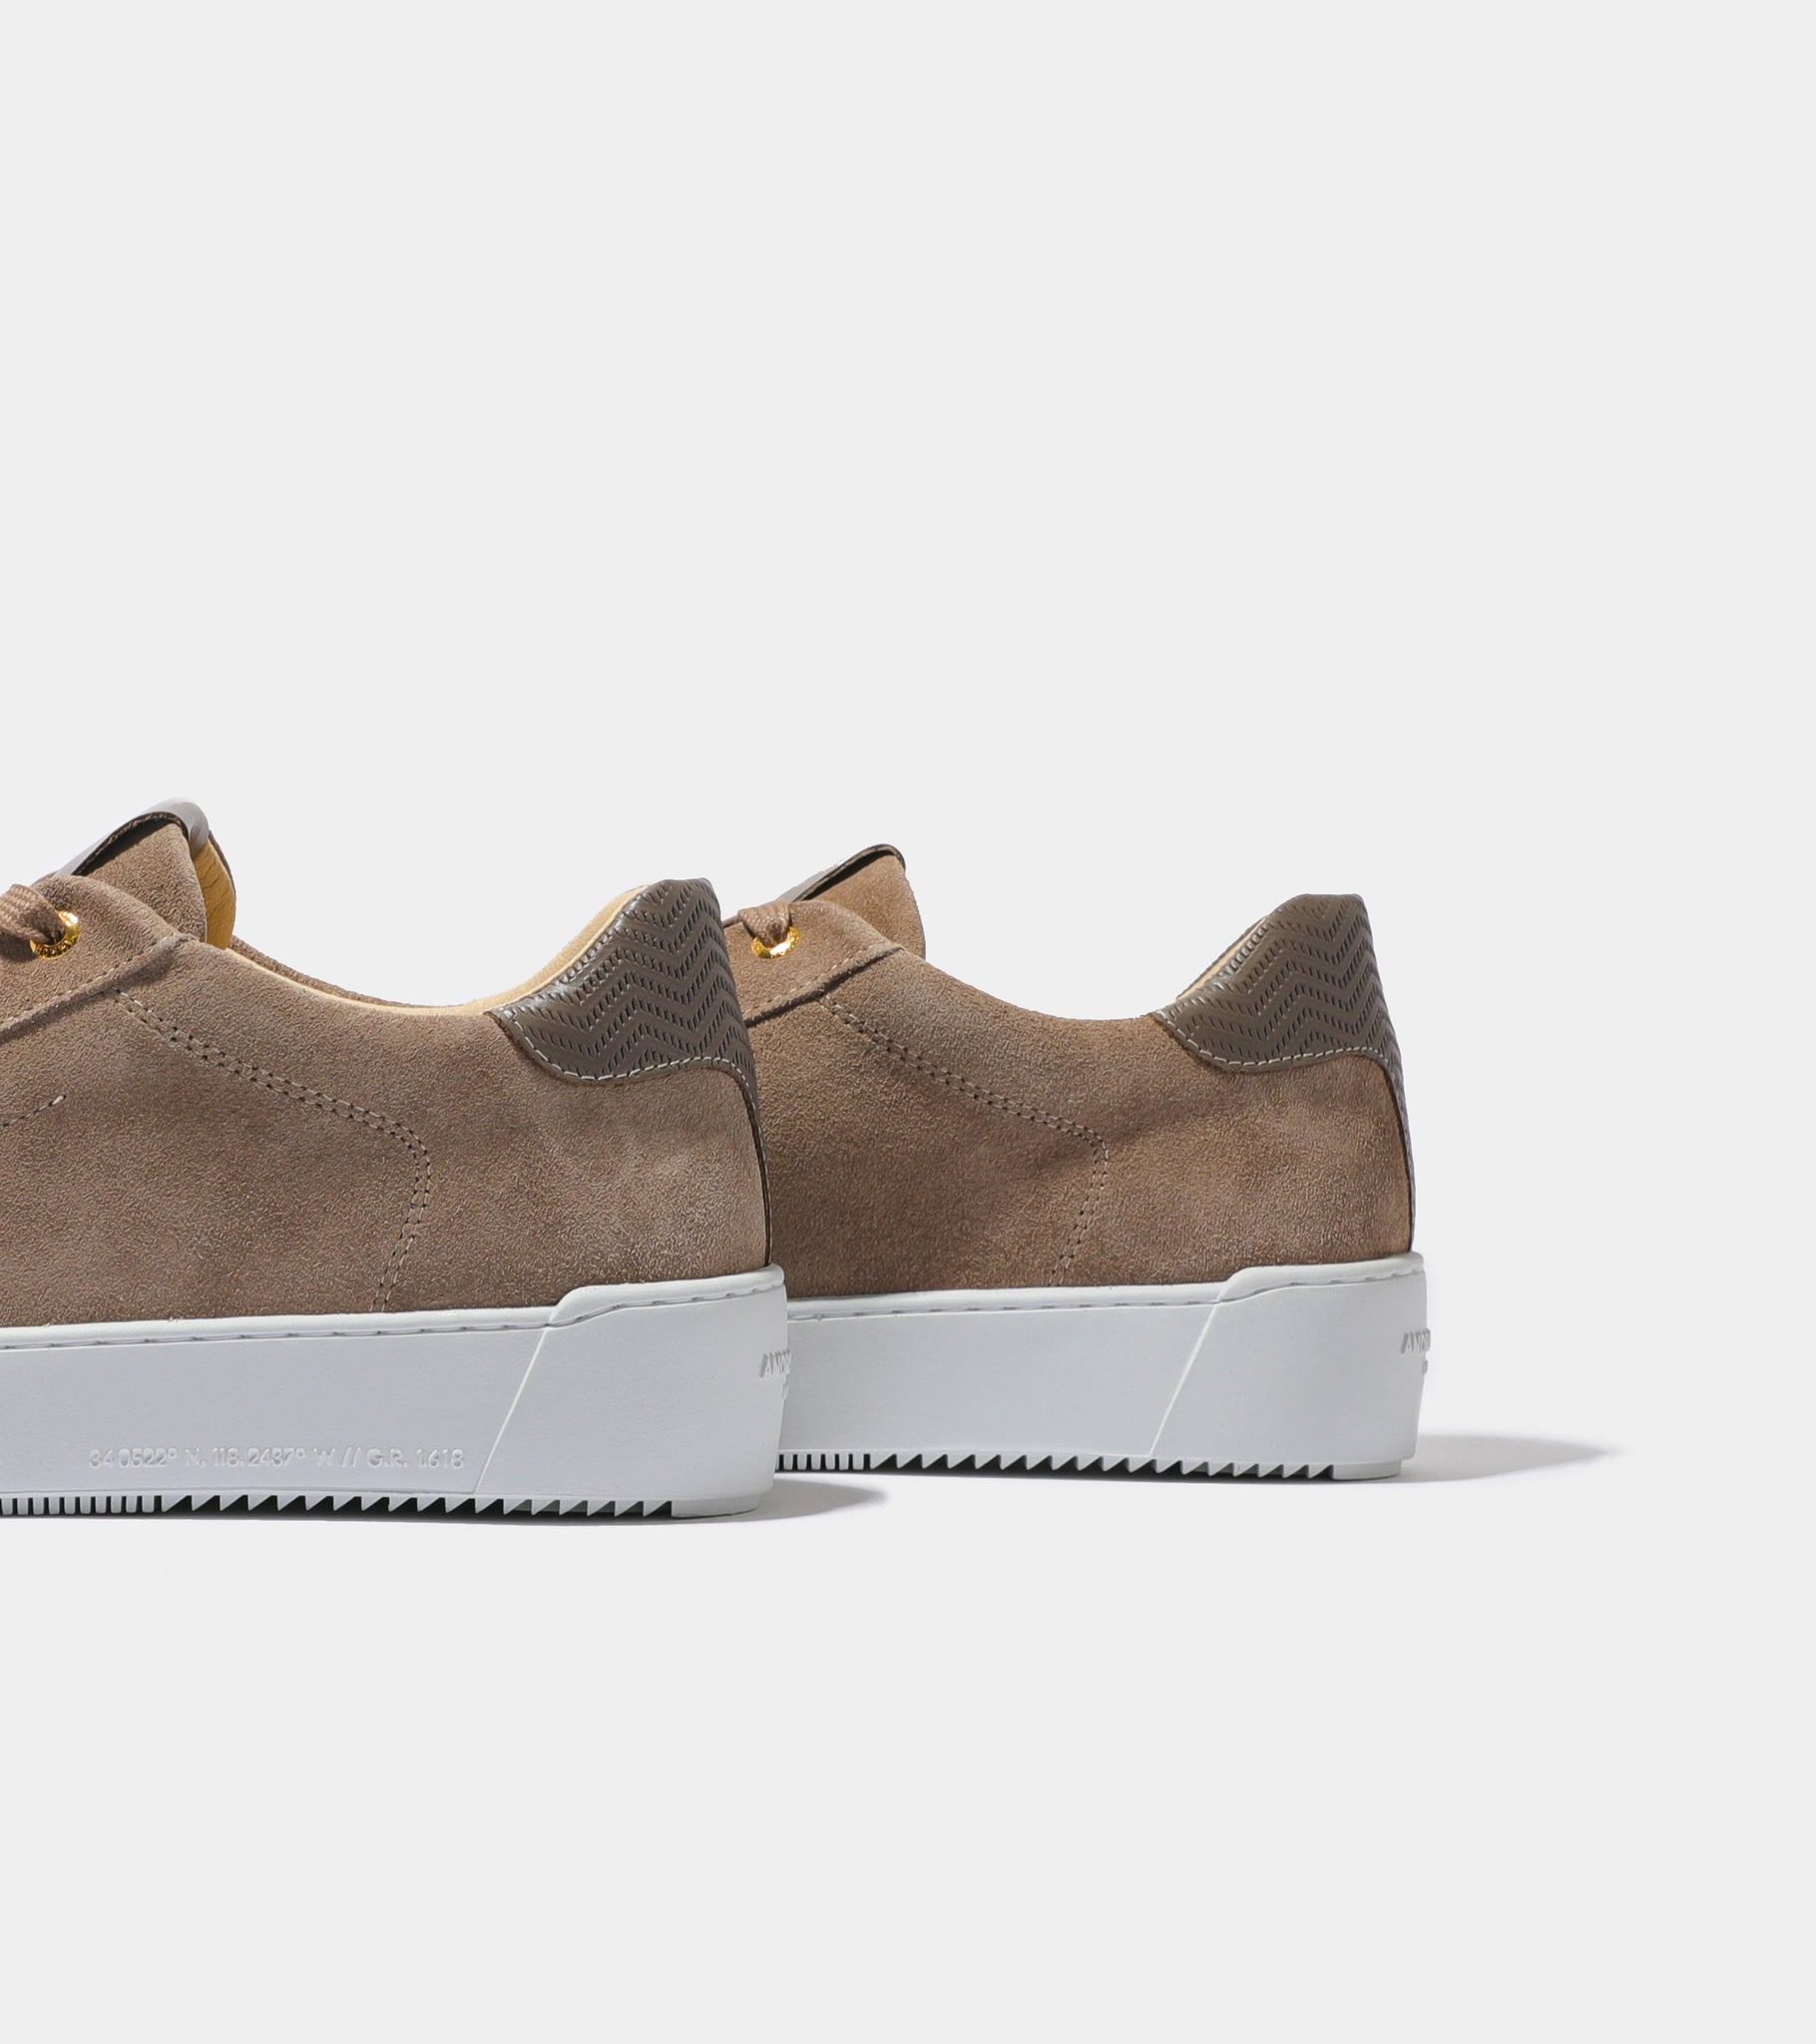 Ecom imagery of the heel on the Zuma Taupe Suede Zig Zag Leather Android Homme Trainers.